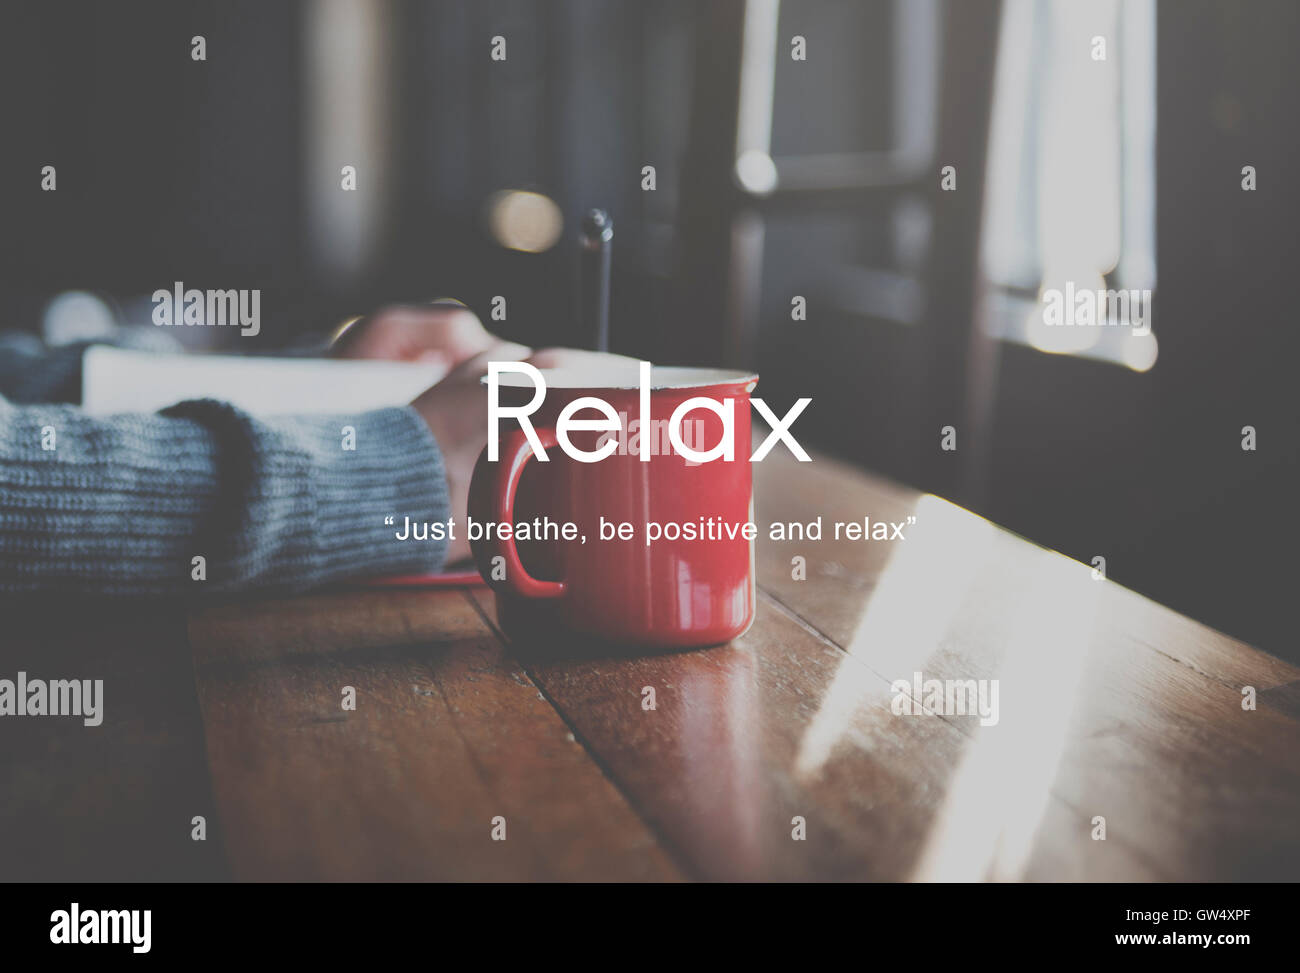 Relax Relaxation Peace Serenity Concept Stock Photo